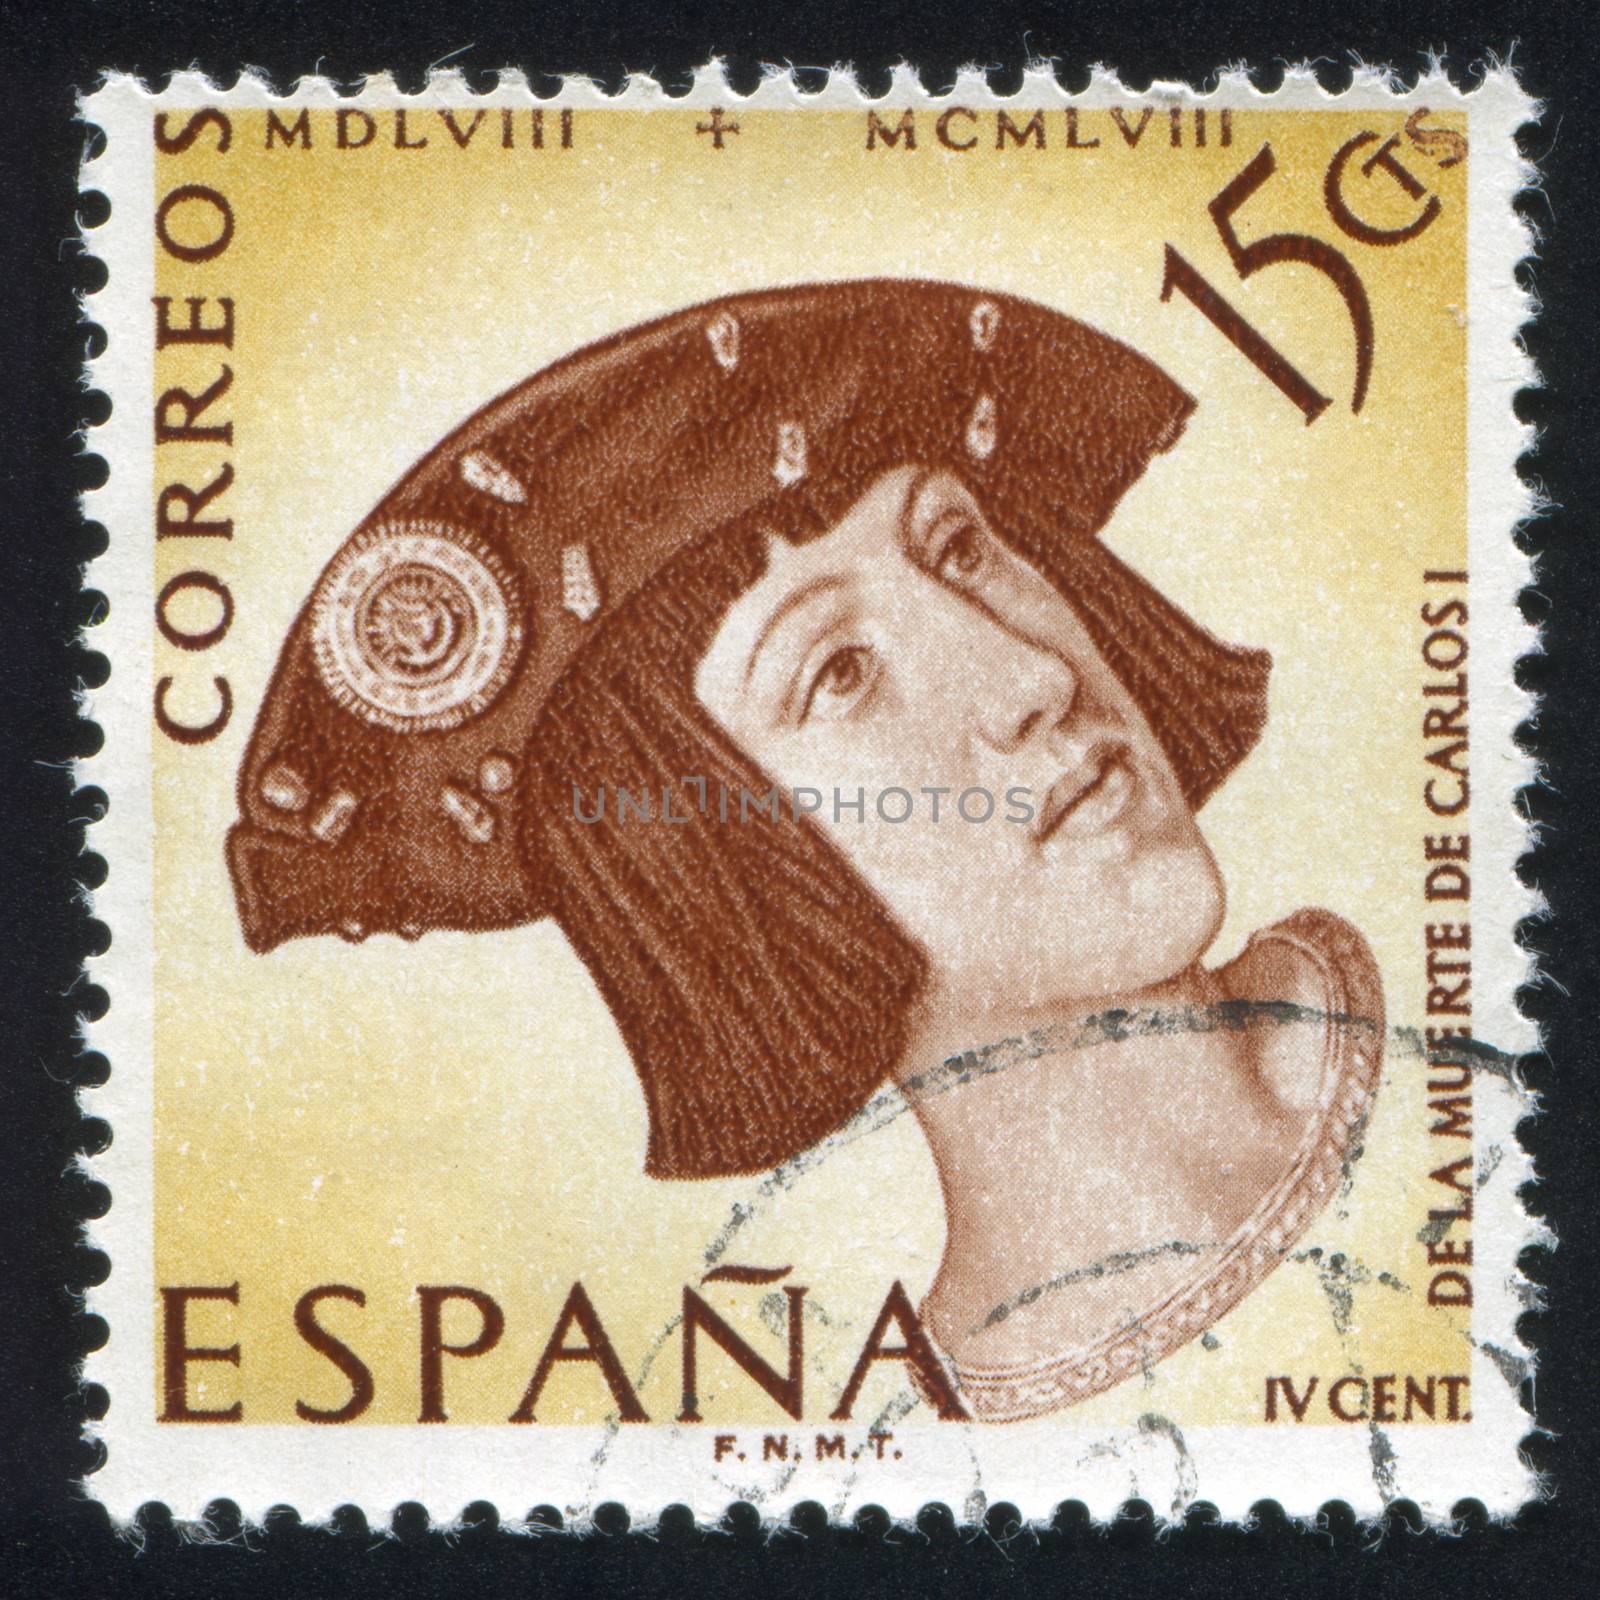 SPAIN - CIRCA 1958: stamp printed by Spain, shows Portrait of Charles V with beret, circa 1958